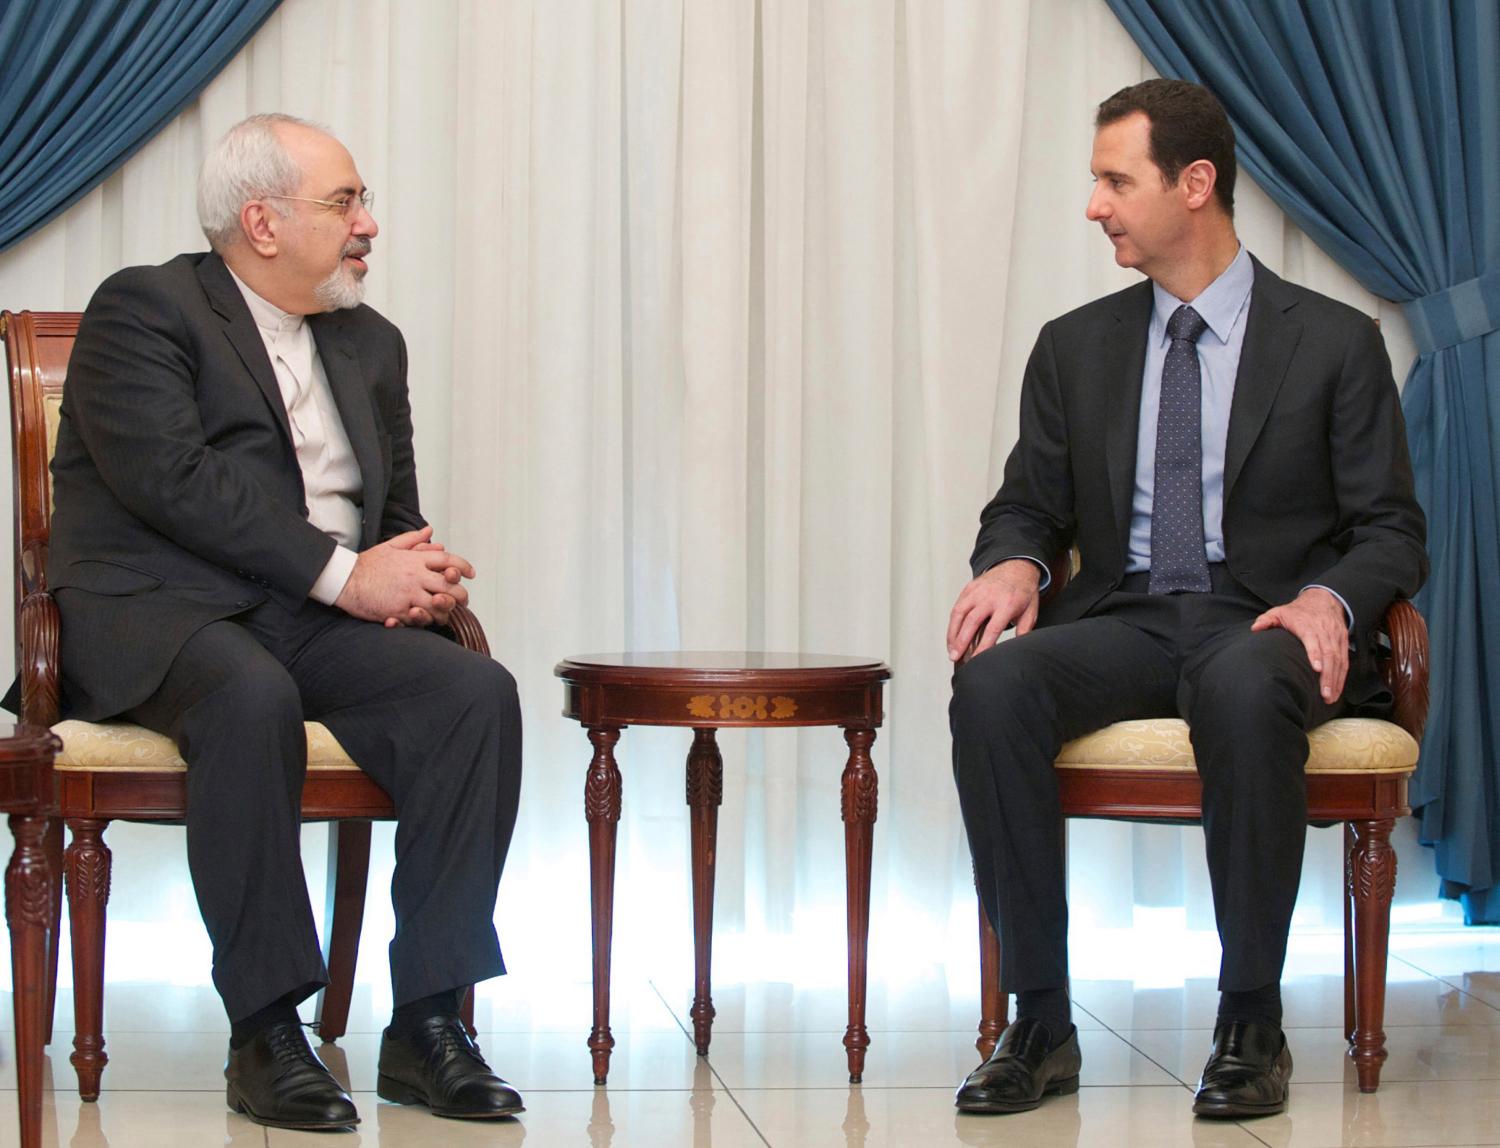 Syria's President Bashar al-Assad (R) meets Iran's Foreign Minister Mohammad Javad Zarif in Damascus January 15, 2014, in this handout released by Syria's national news agency SANA. REUTERS/SANA/Handout via Reuters (SYRIA - Tags: POLITICS CONFLICT) ATTENTION EDITORS - THIS IMAGE WAS PROVIDED BY A THIRD PARTY. FOR EDITORIAL USE ONLY. NOT FOR SALE FOR MARKETING OR ADVERTISING CAMPAIGNS. THIS PICTURE IS DISTRIBUTED EXACTLY AS RECEIVED BY REUTERS, AS A SERVICE TO CLIENTS